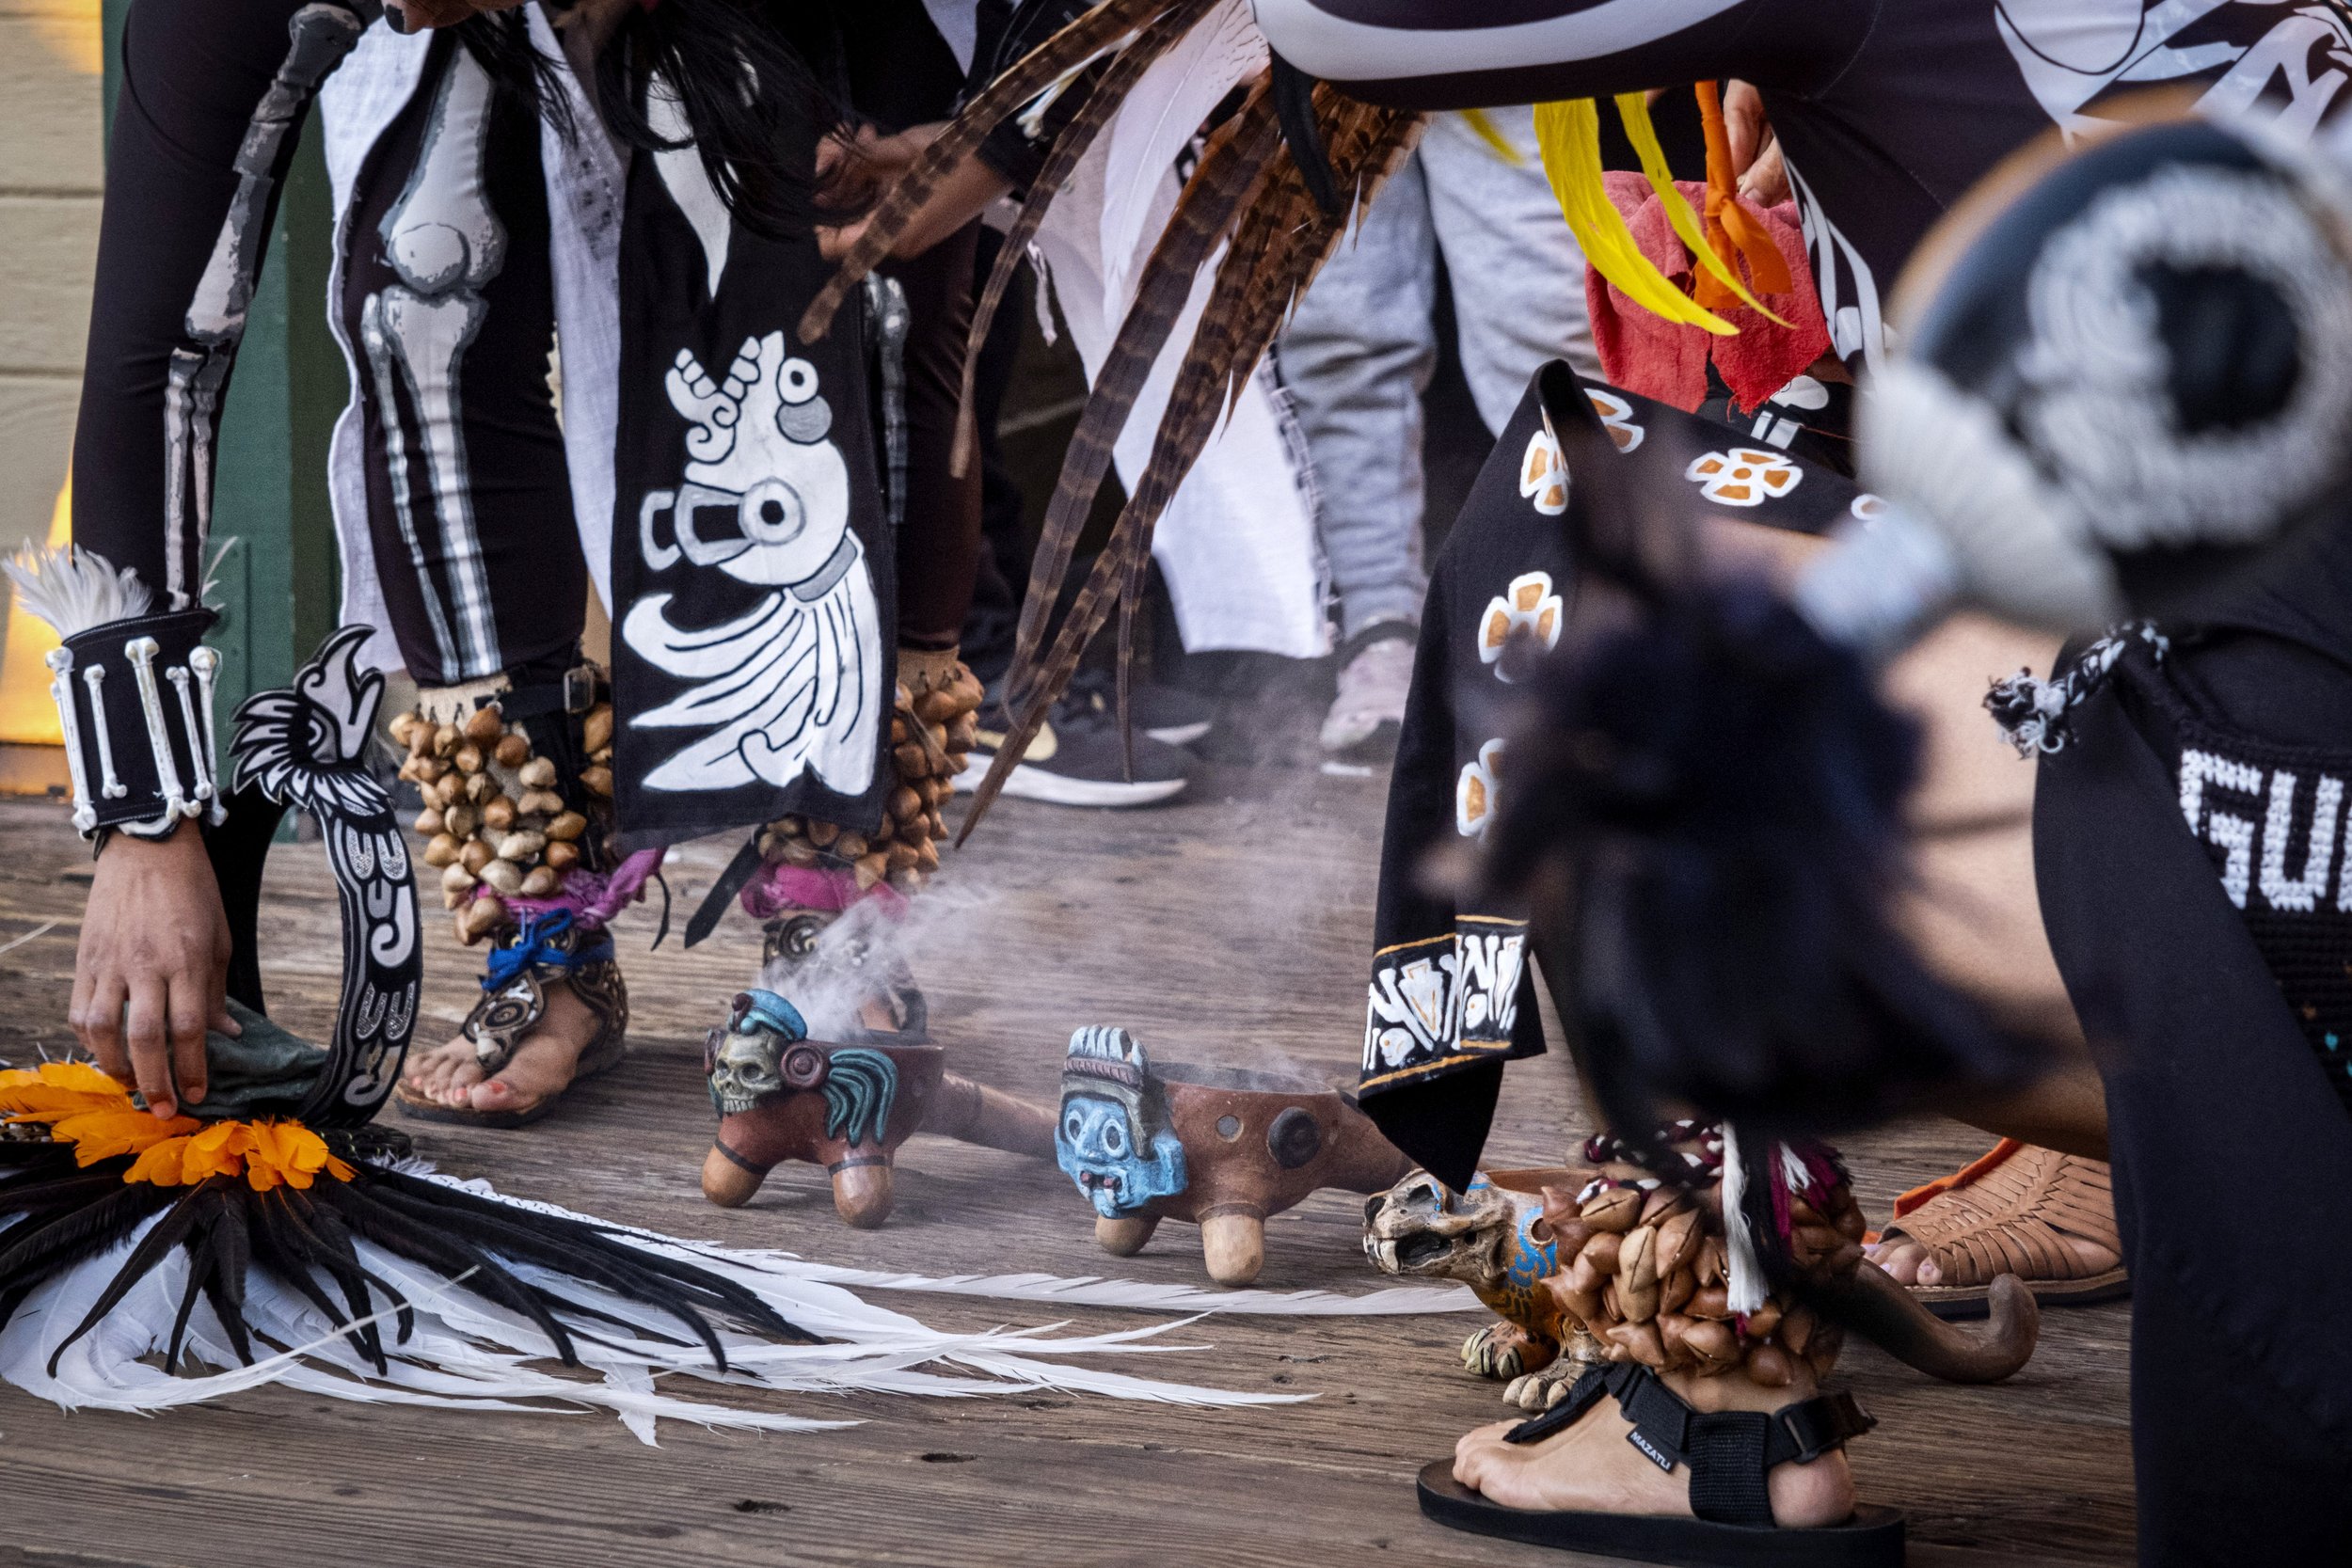  Dia de Los Muertos on the Santa Monica Pier began its celebration on November 2, with Natives from the Tongva tribe joining Aztec members of the Kalpoli Tonelhuayo circle at the west end of the Santa Monica Pier. “We burn charcoal and place a specia